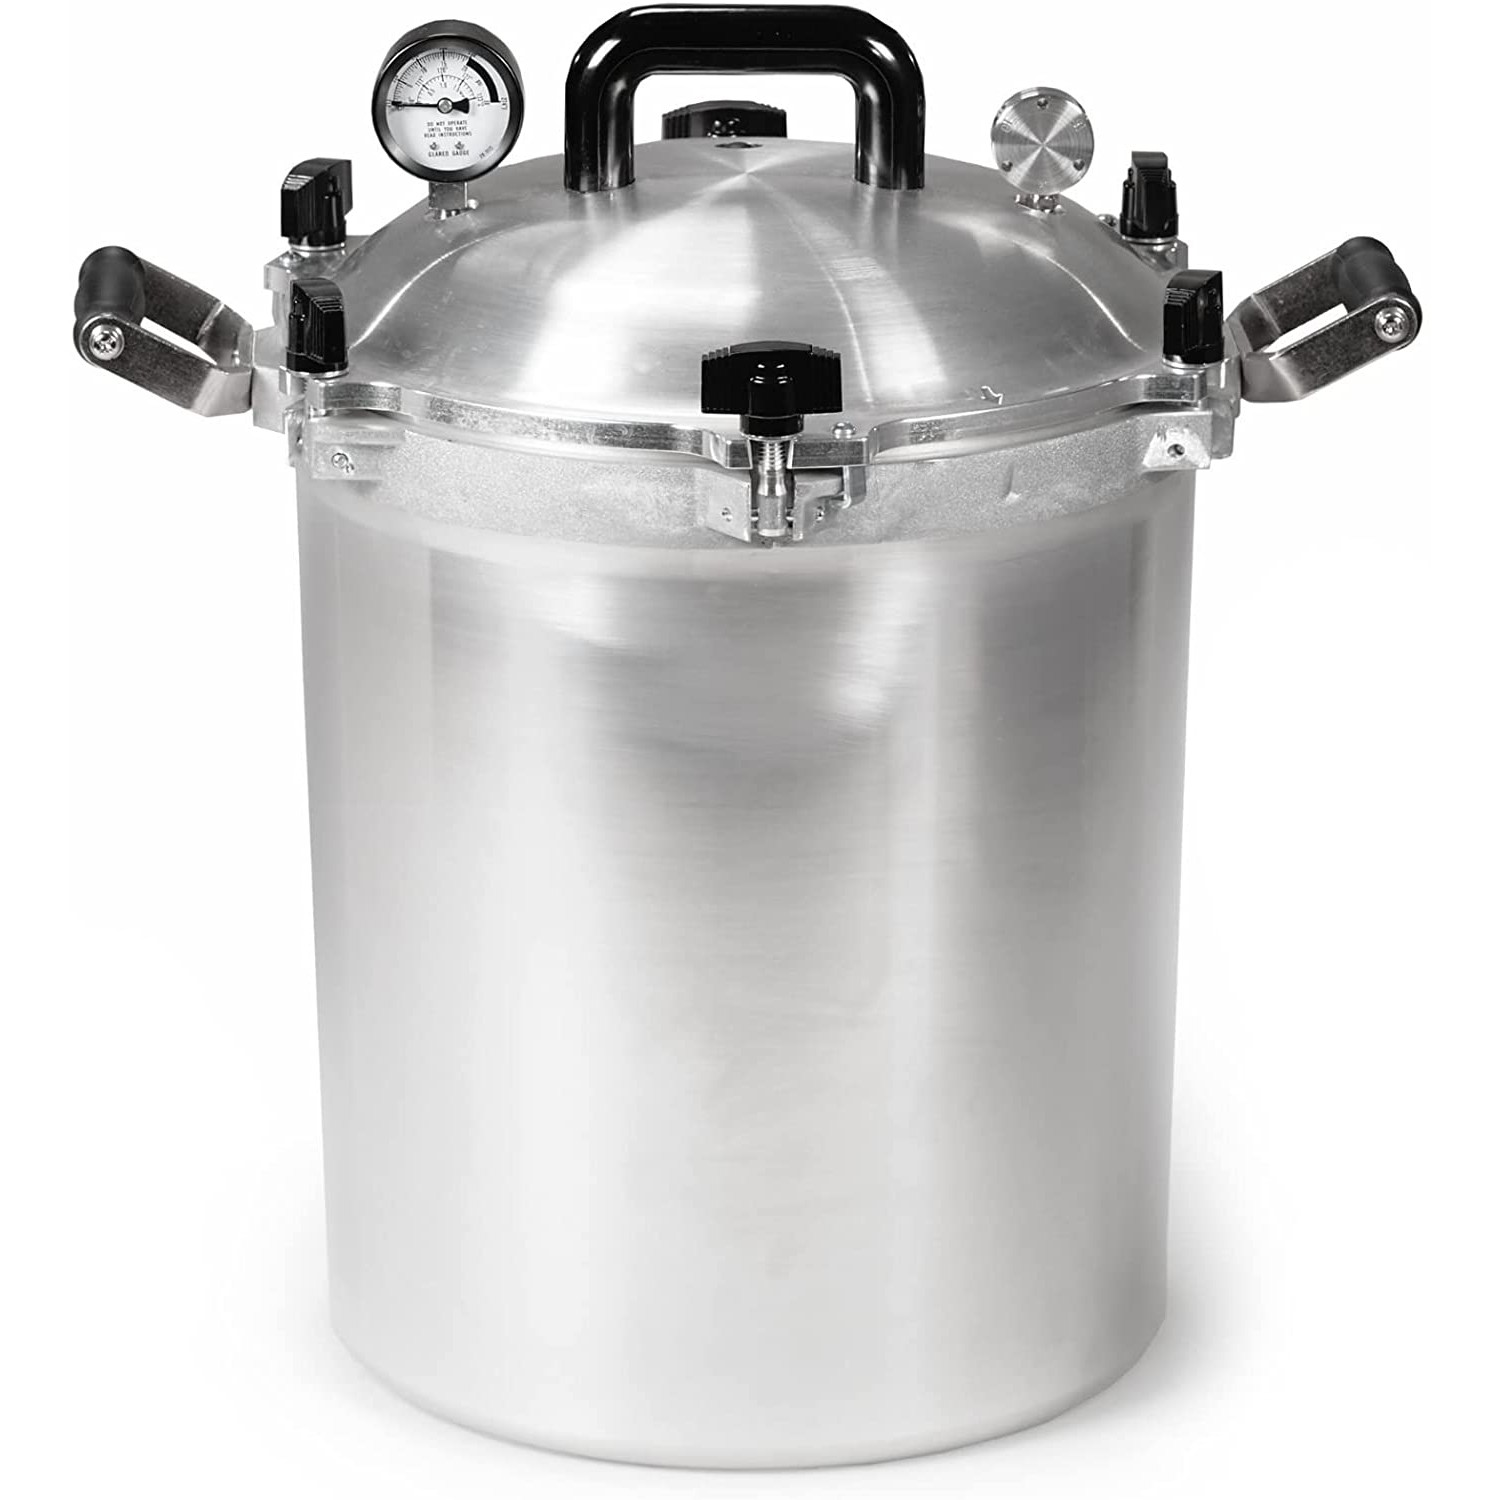 All American Pressure Cooker Canner for Home Stovetop Canning, USA Made for Gas or Electric Stoves, 30 Quarts - image 1 of 7